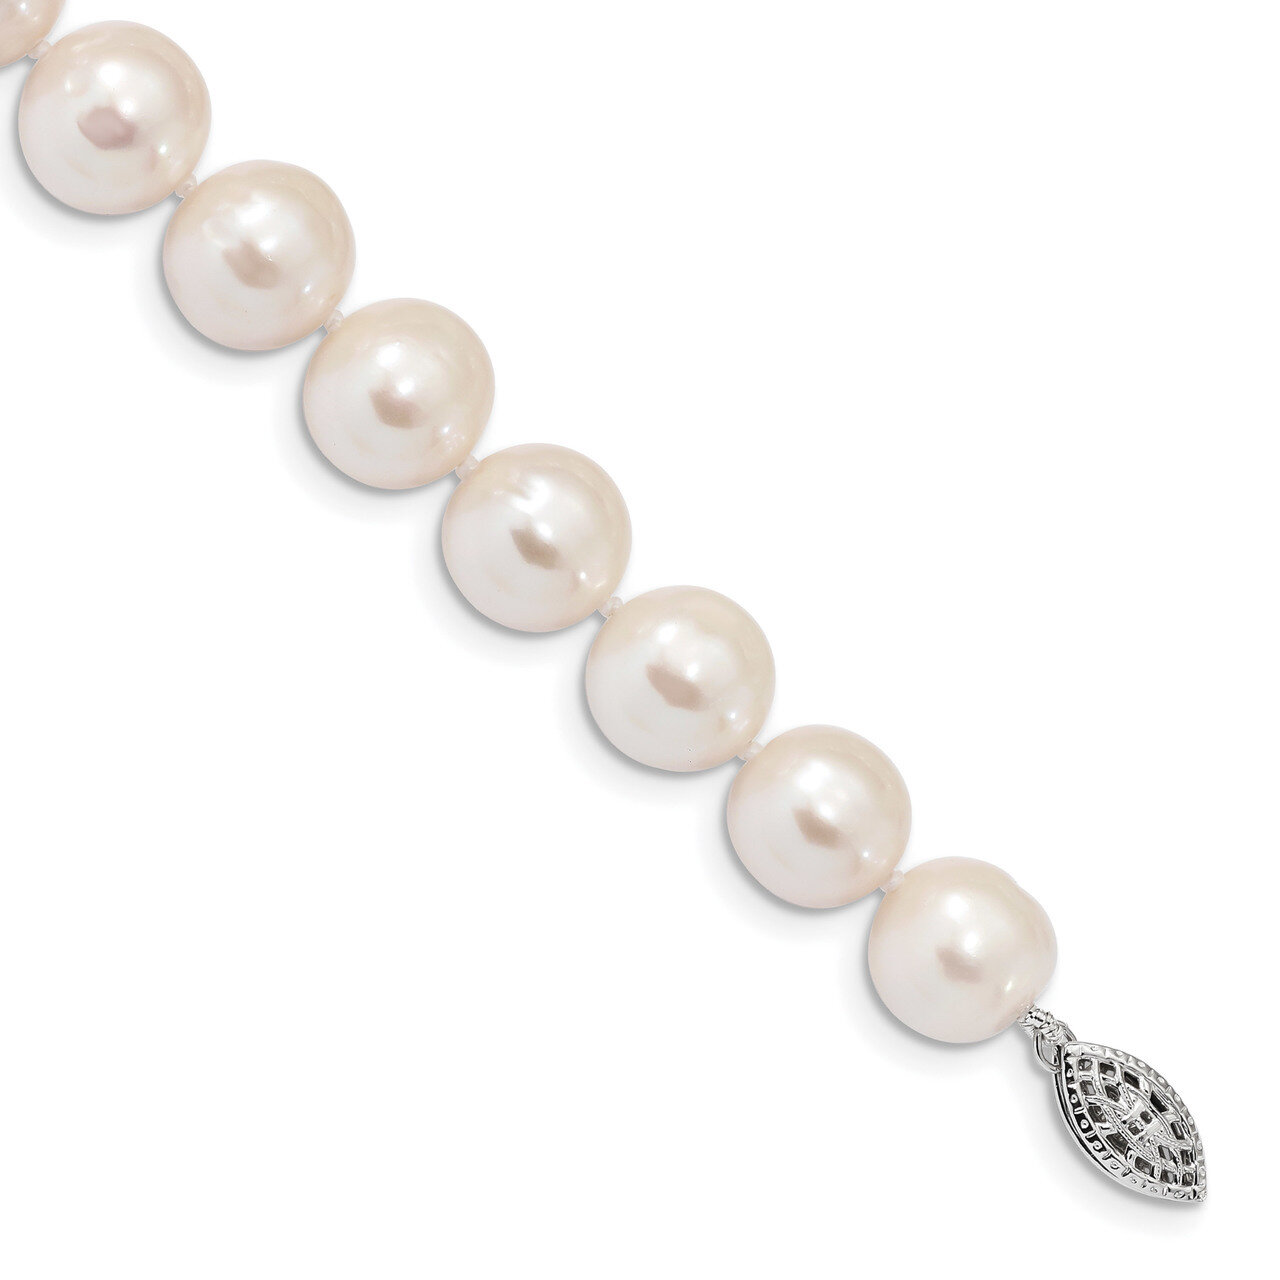 11-12mm White Freshwater Cultured Pearl Bracelet 7.25 Inch Sterling Silver Rhodium QH5151-7.25